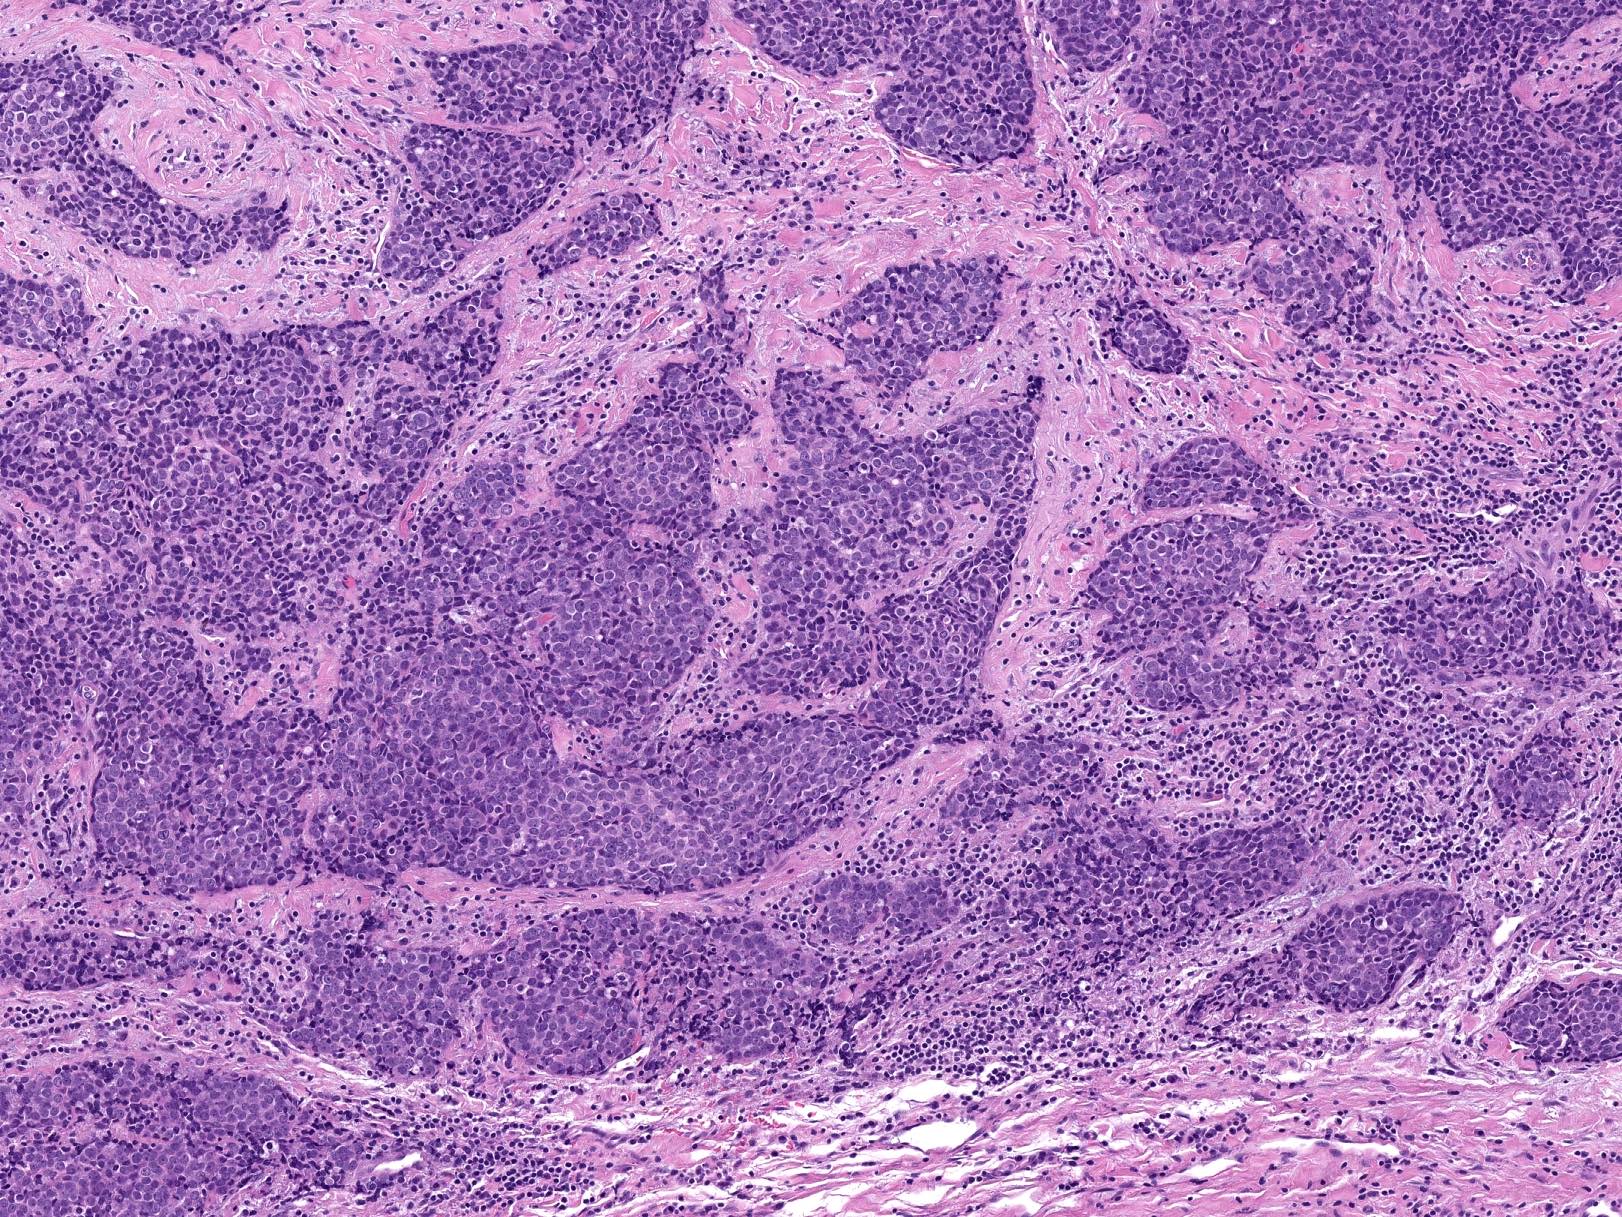 Tumor nests and fibrosis